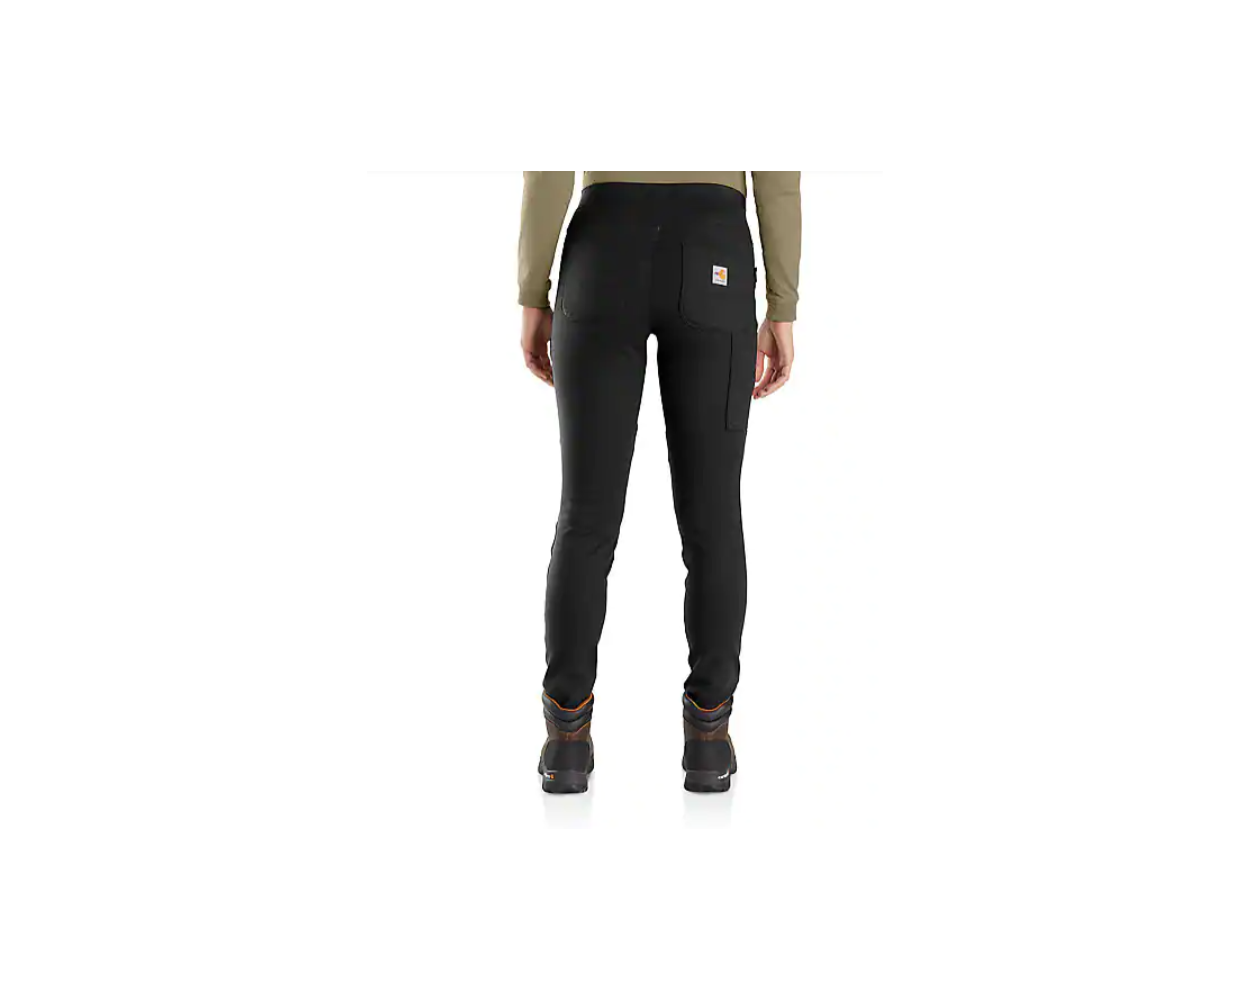 Carhartt Women's Force Fitted Heavyweight Lined Legging, Black, Medium at   Women's Clothing store